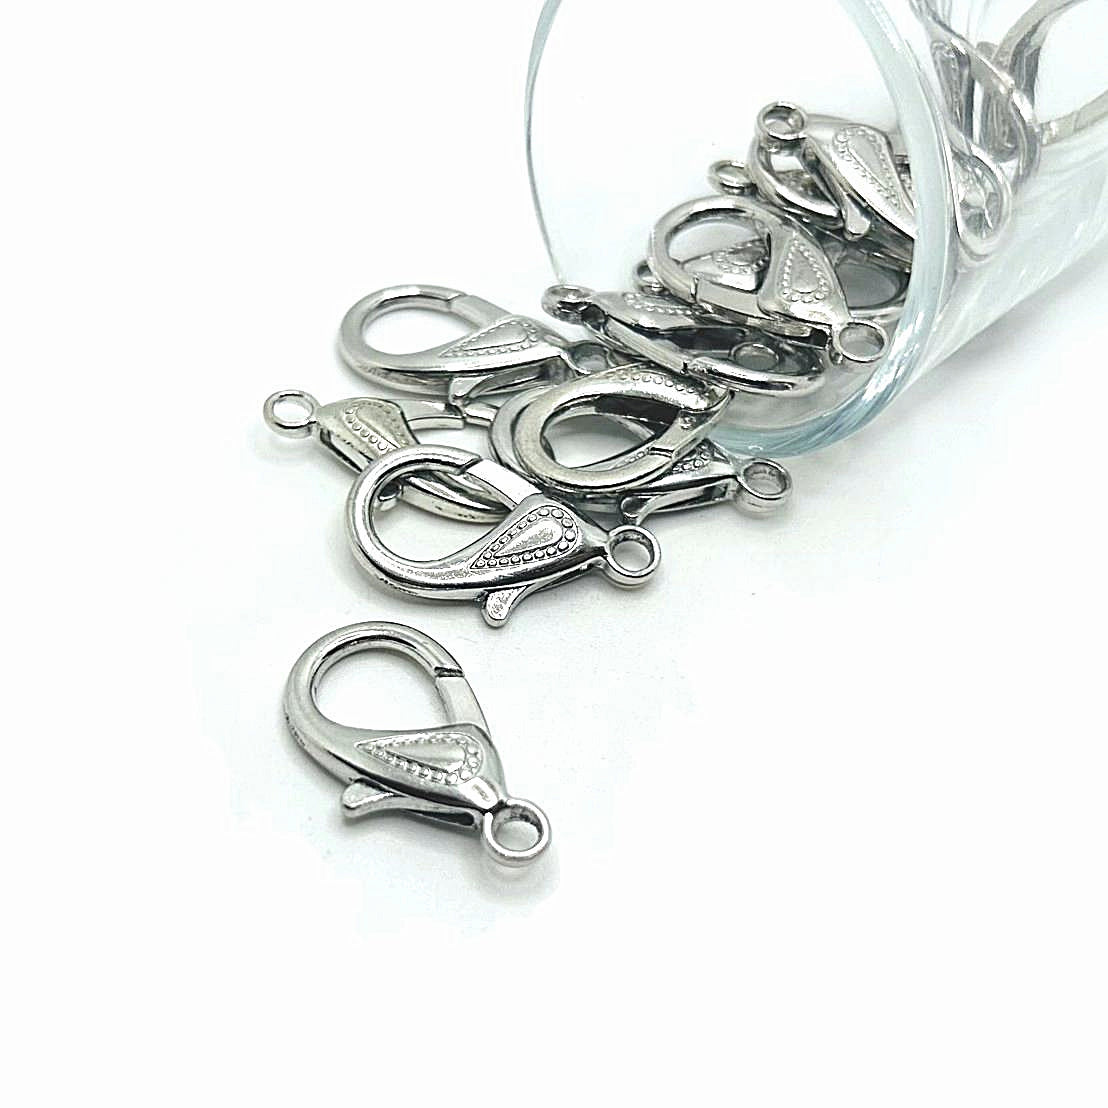 4, 20 or 50 Pieces: 16 x 31 mm Silver Plated Decorative Lobster Clasps